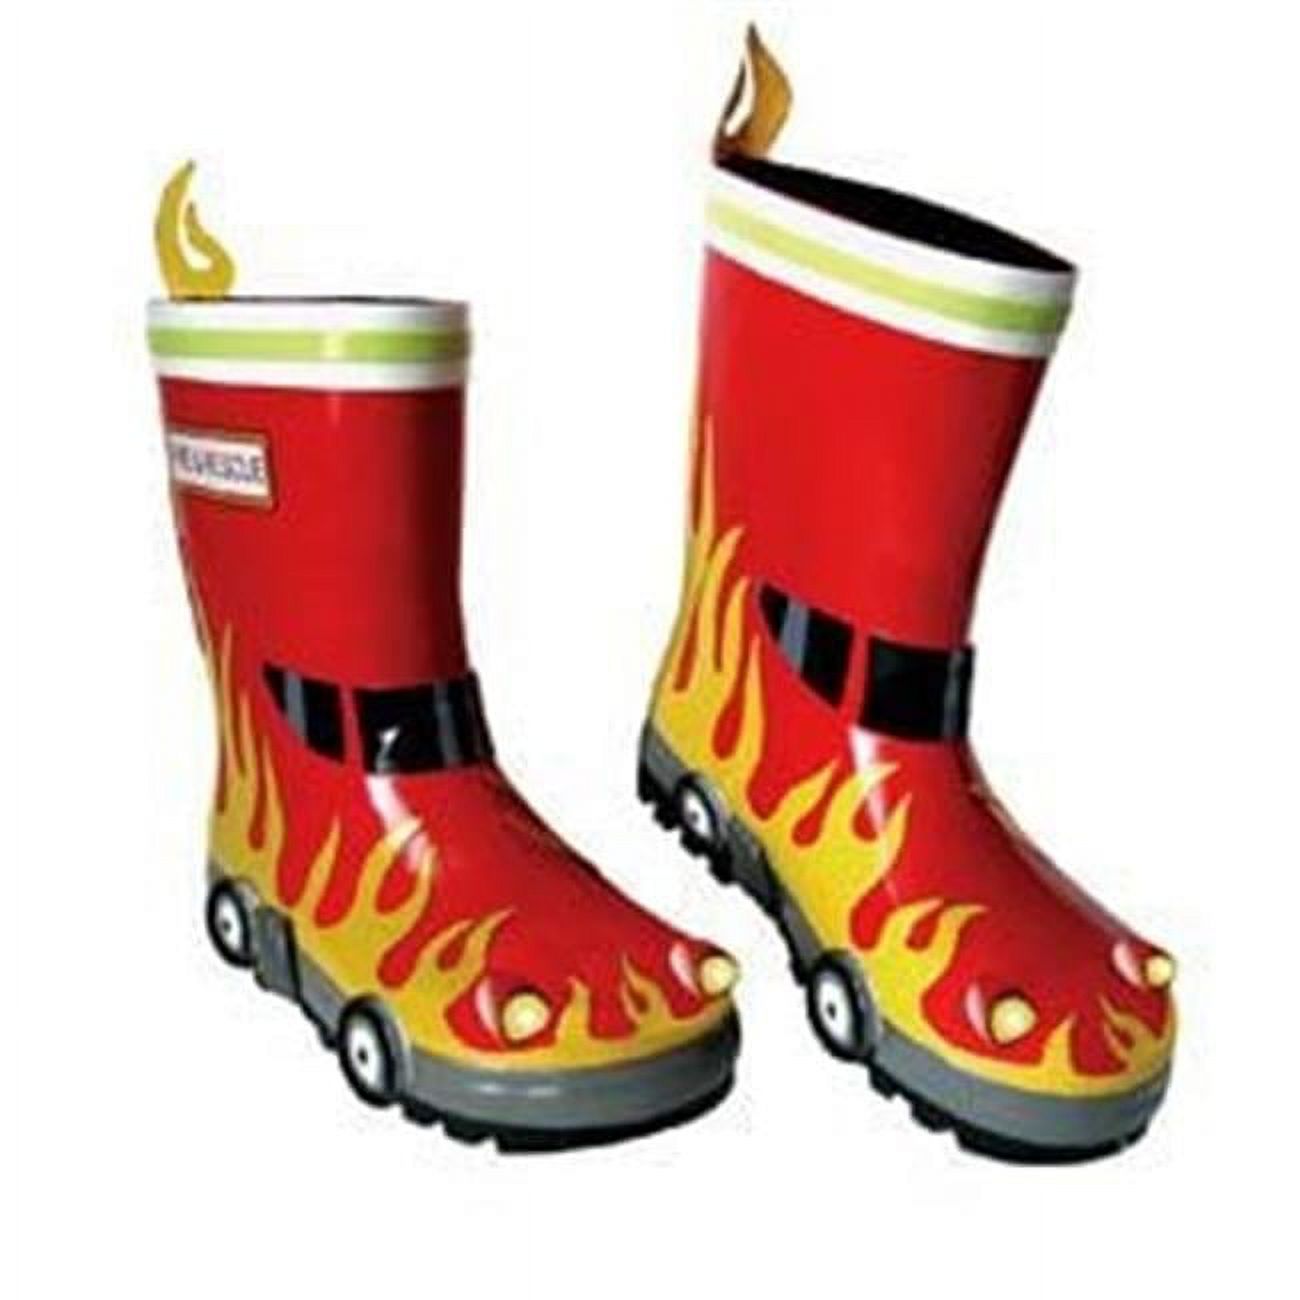 Kidorable red fireman boots 1 Red Fireman Boots 1- Natural Rubber - image 1 of 4